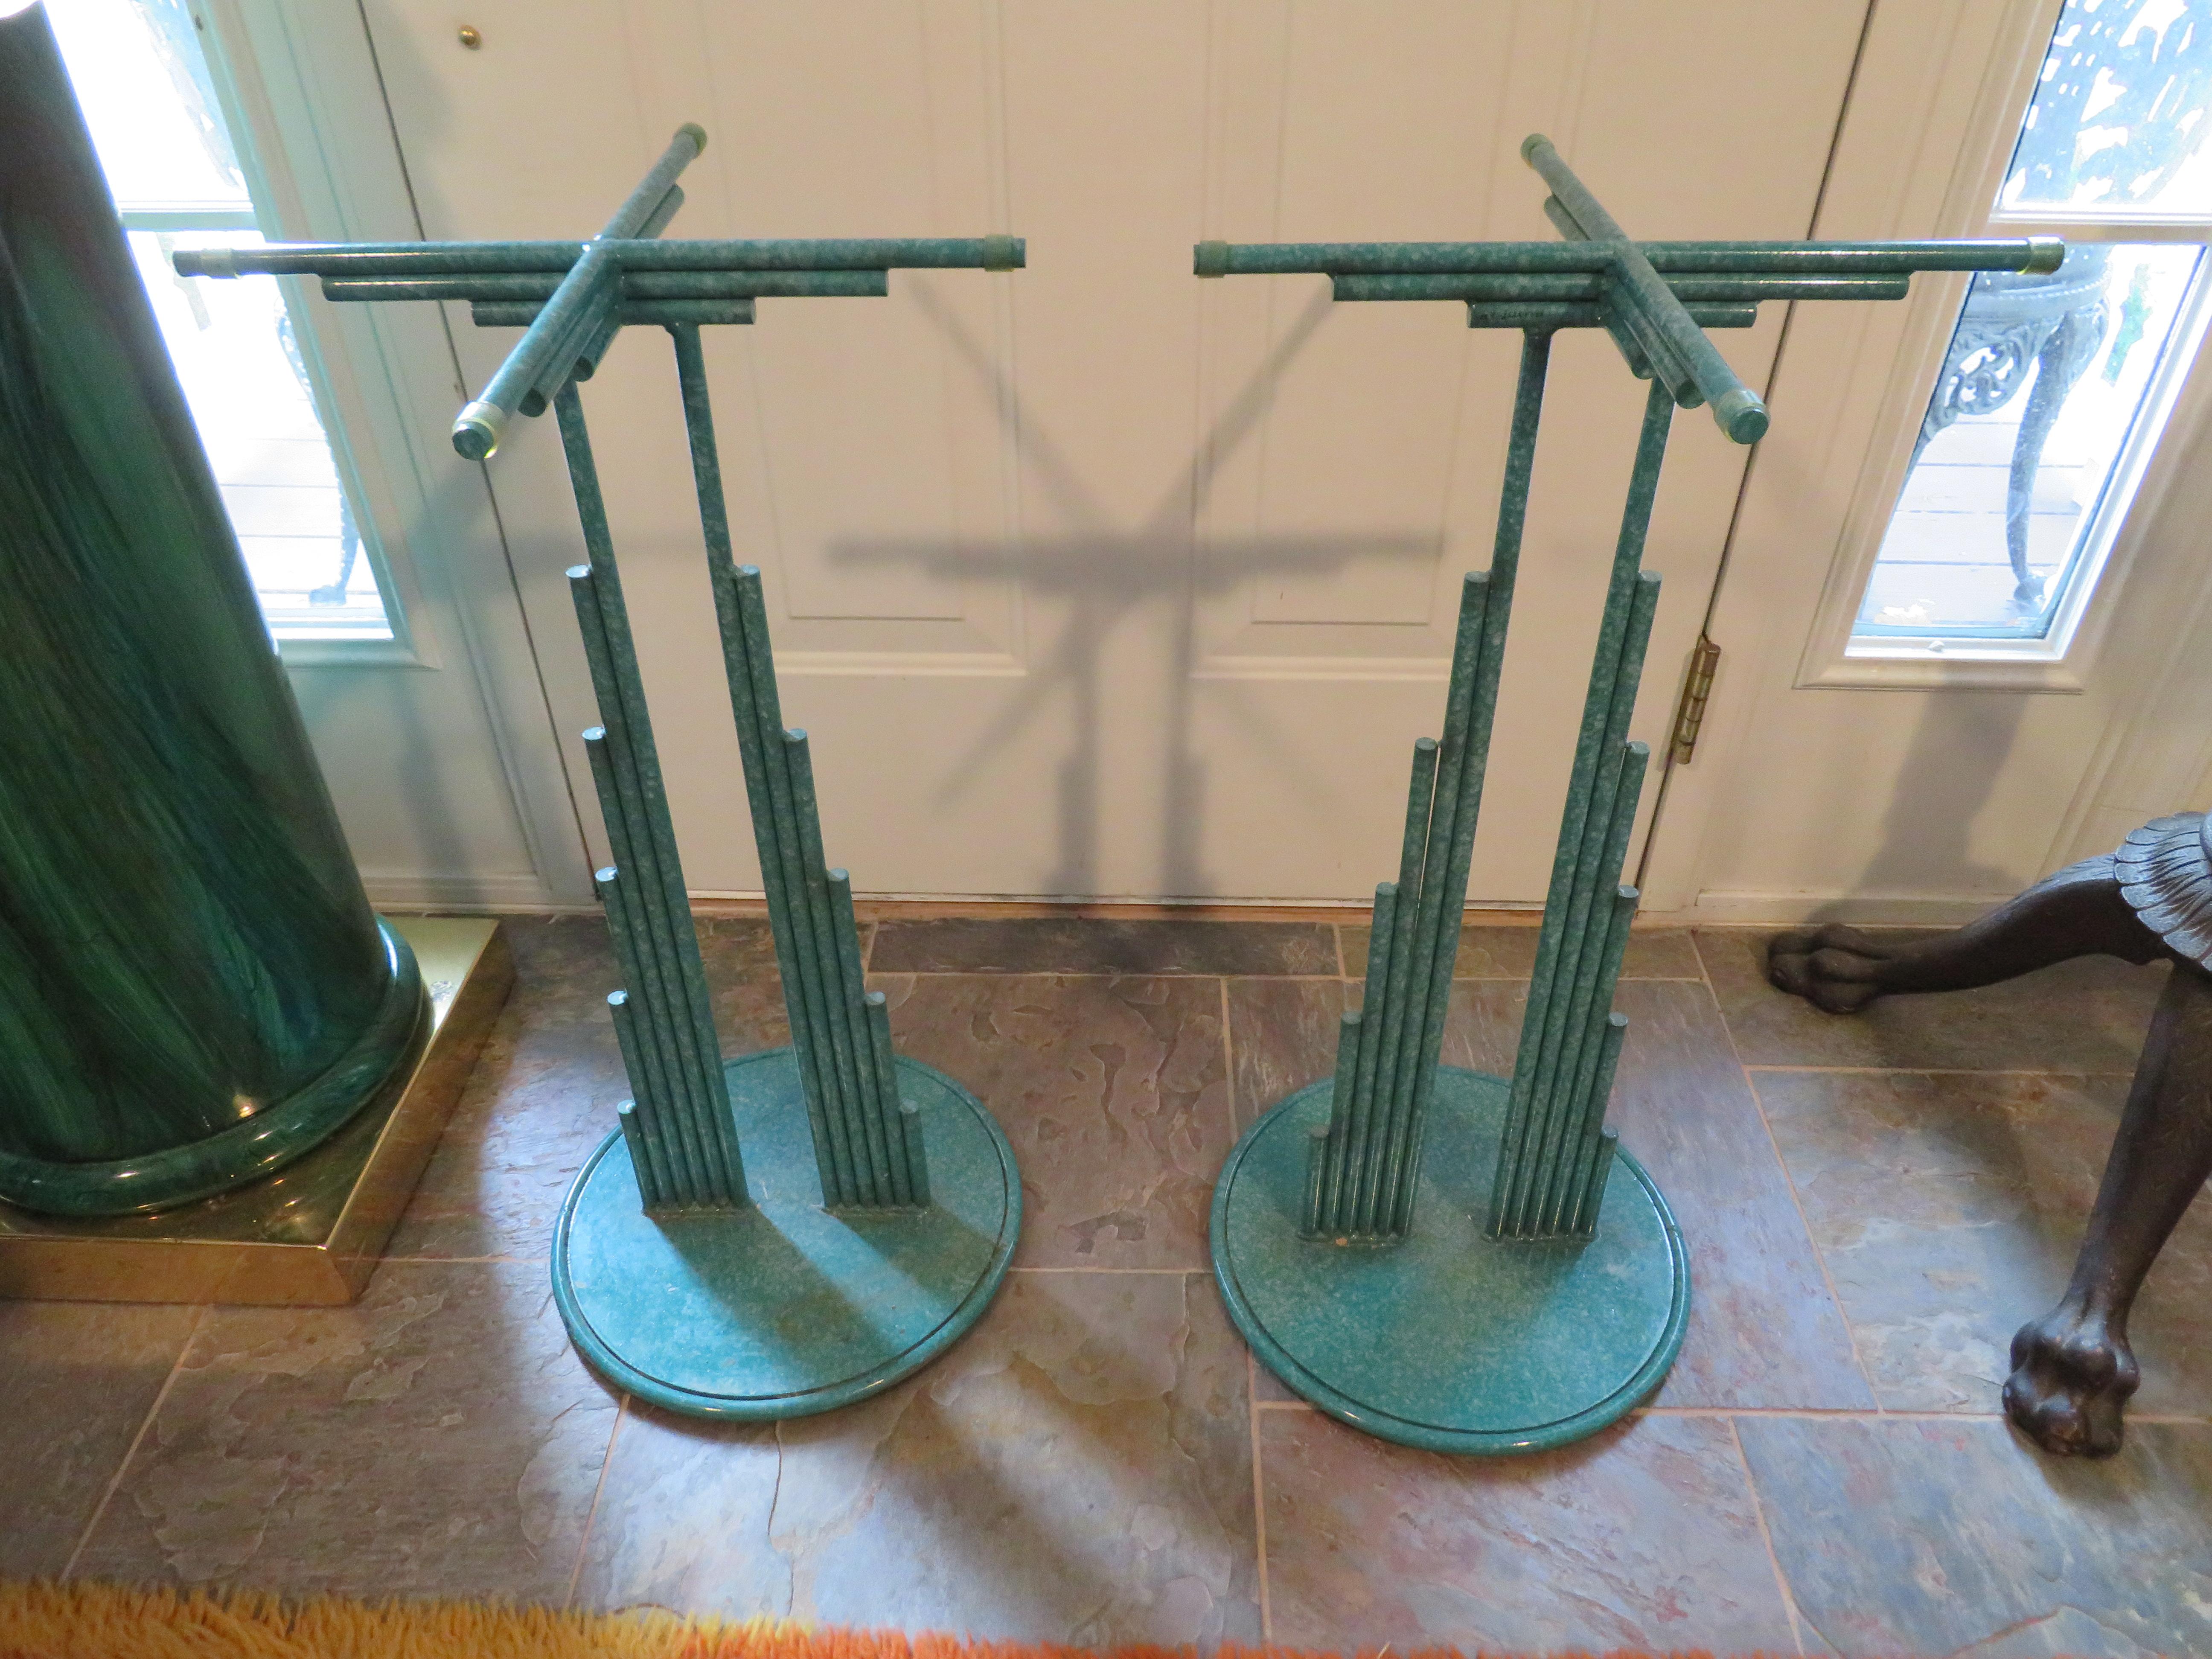 Painted Rare Pair of Curtis Jere Memphis Style Side Tables Pedestals, Mid-Century Modern